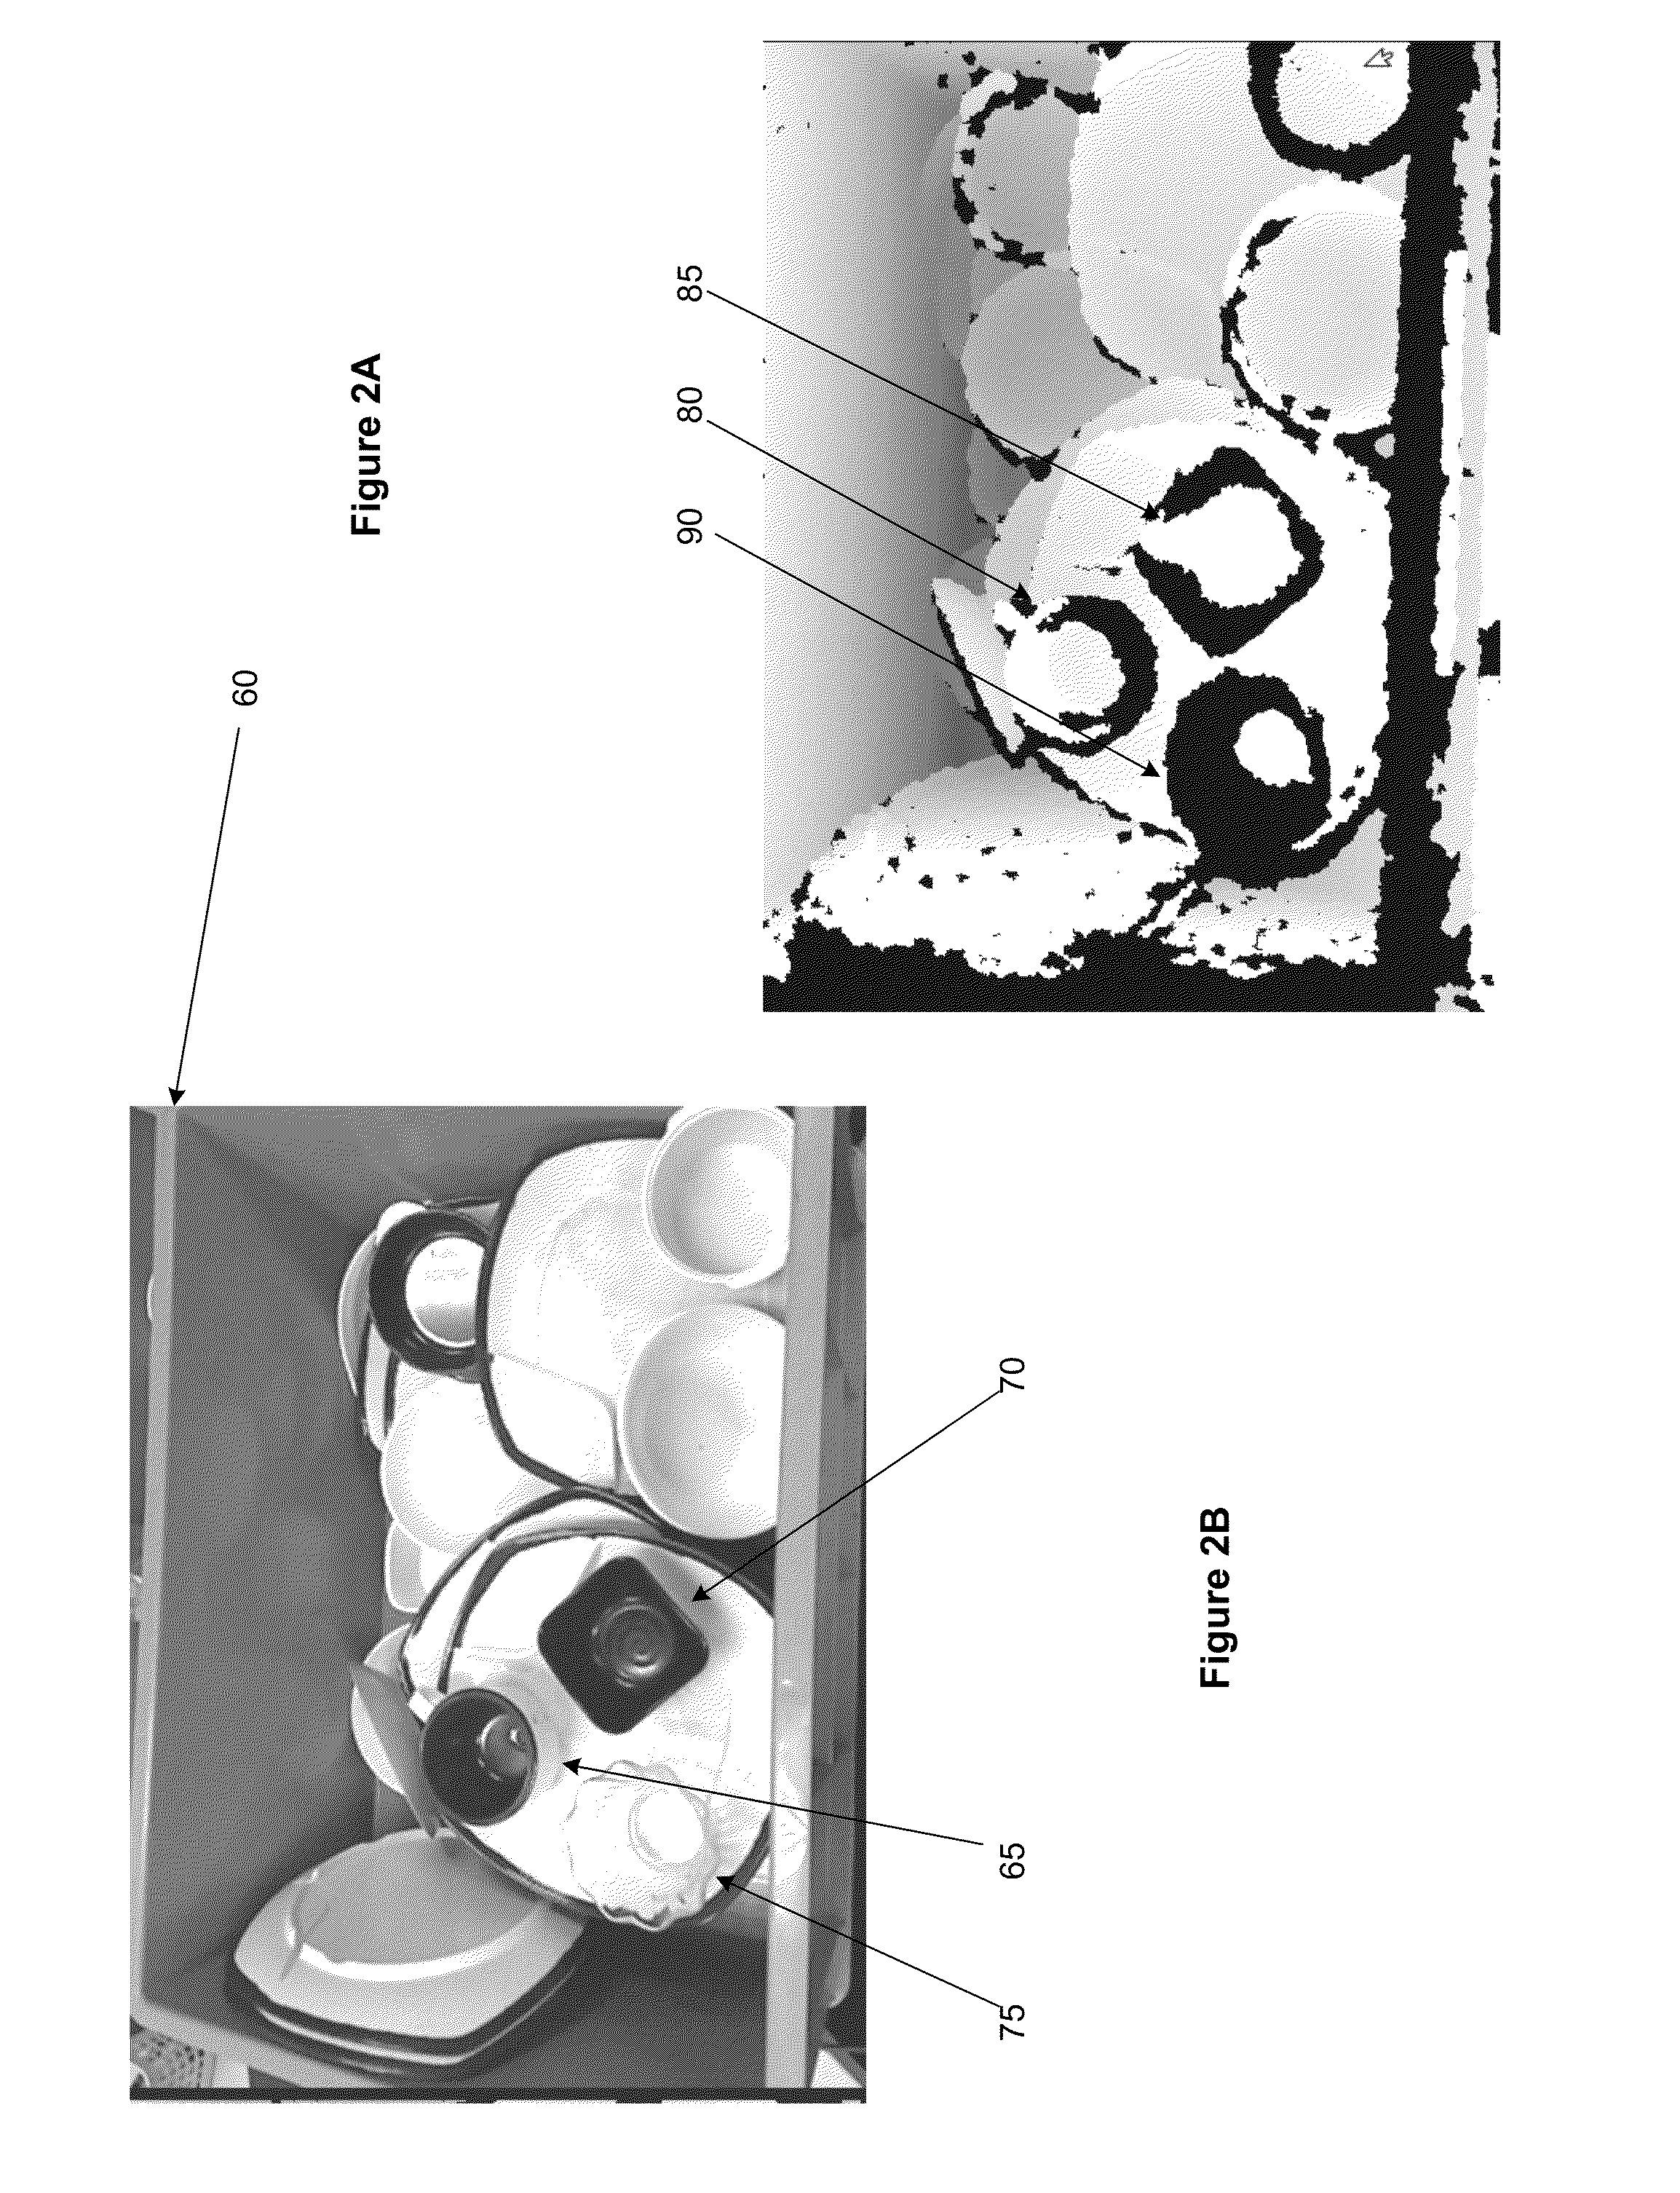 Material handling system and method